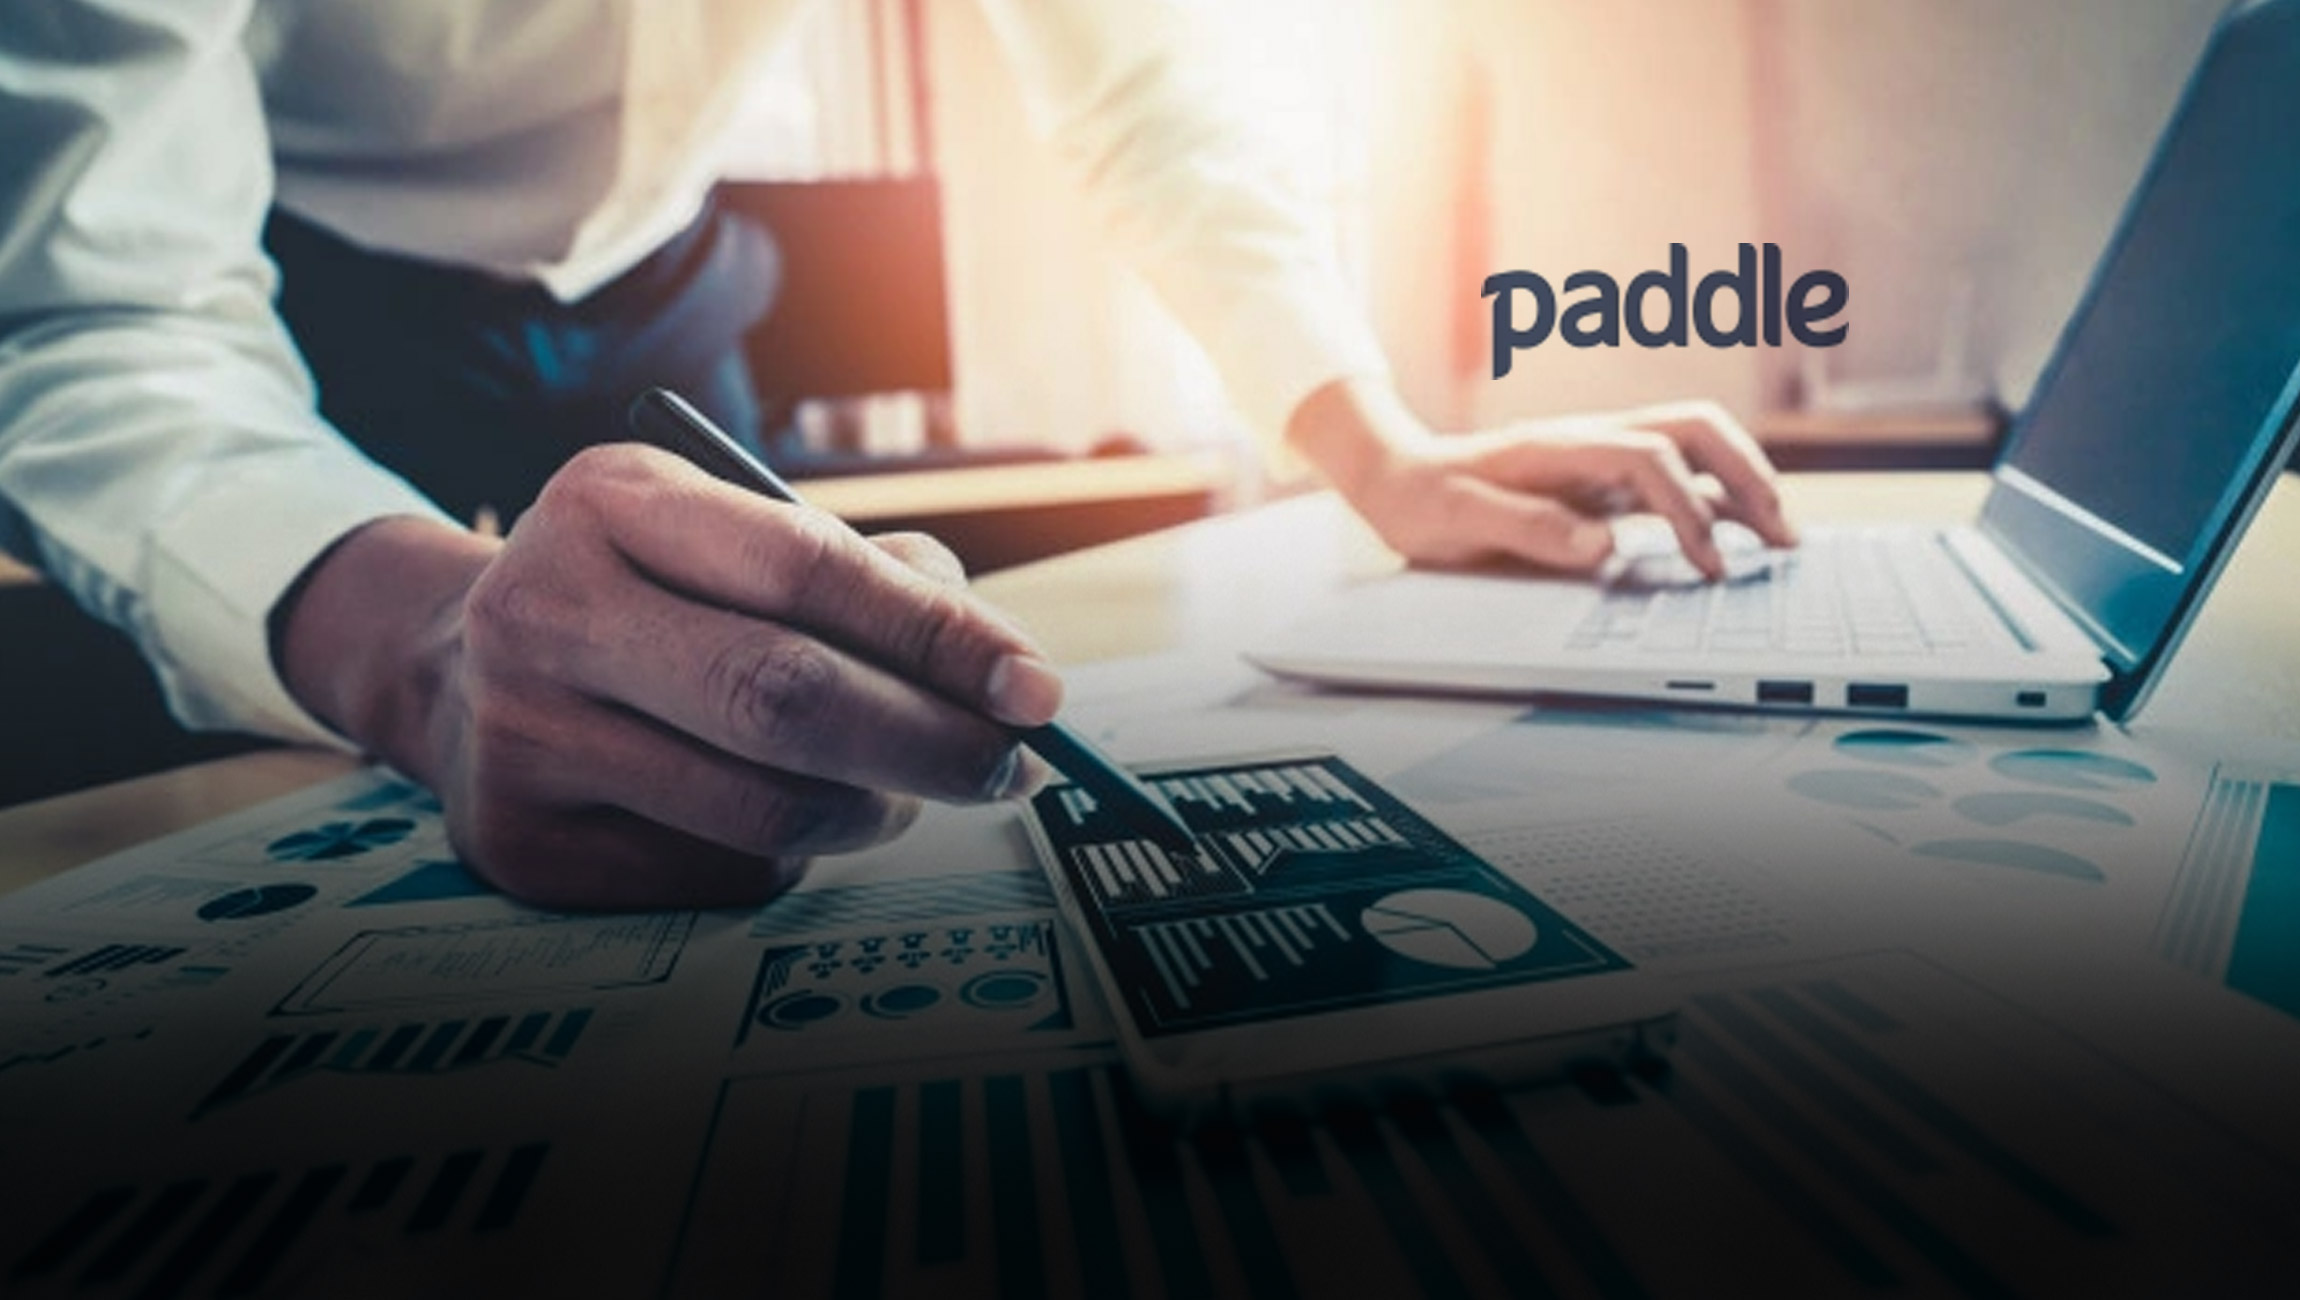 Paddle integrates Alipay, Google Pay and iDeal, empowering software businesses to sell and grow globally